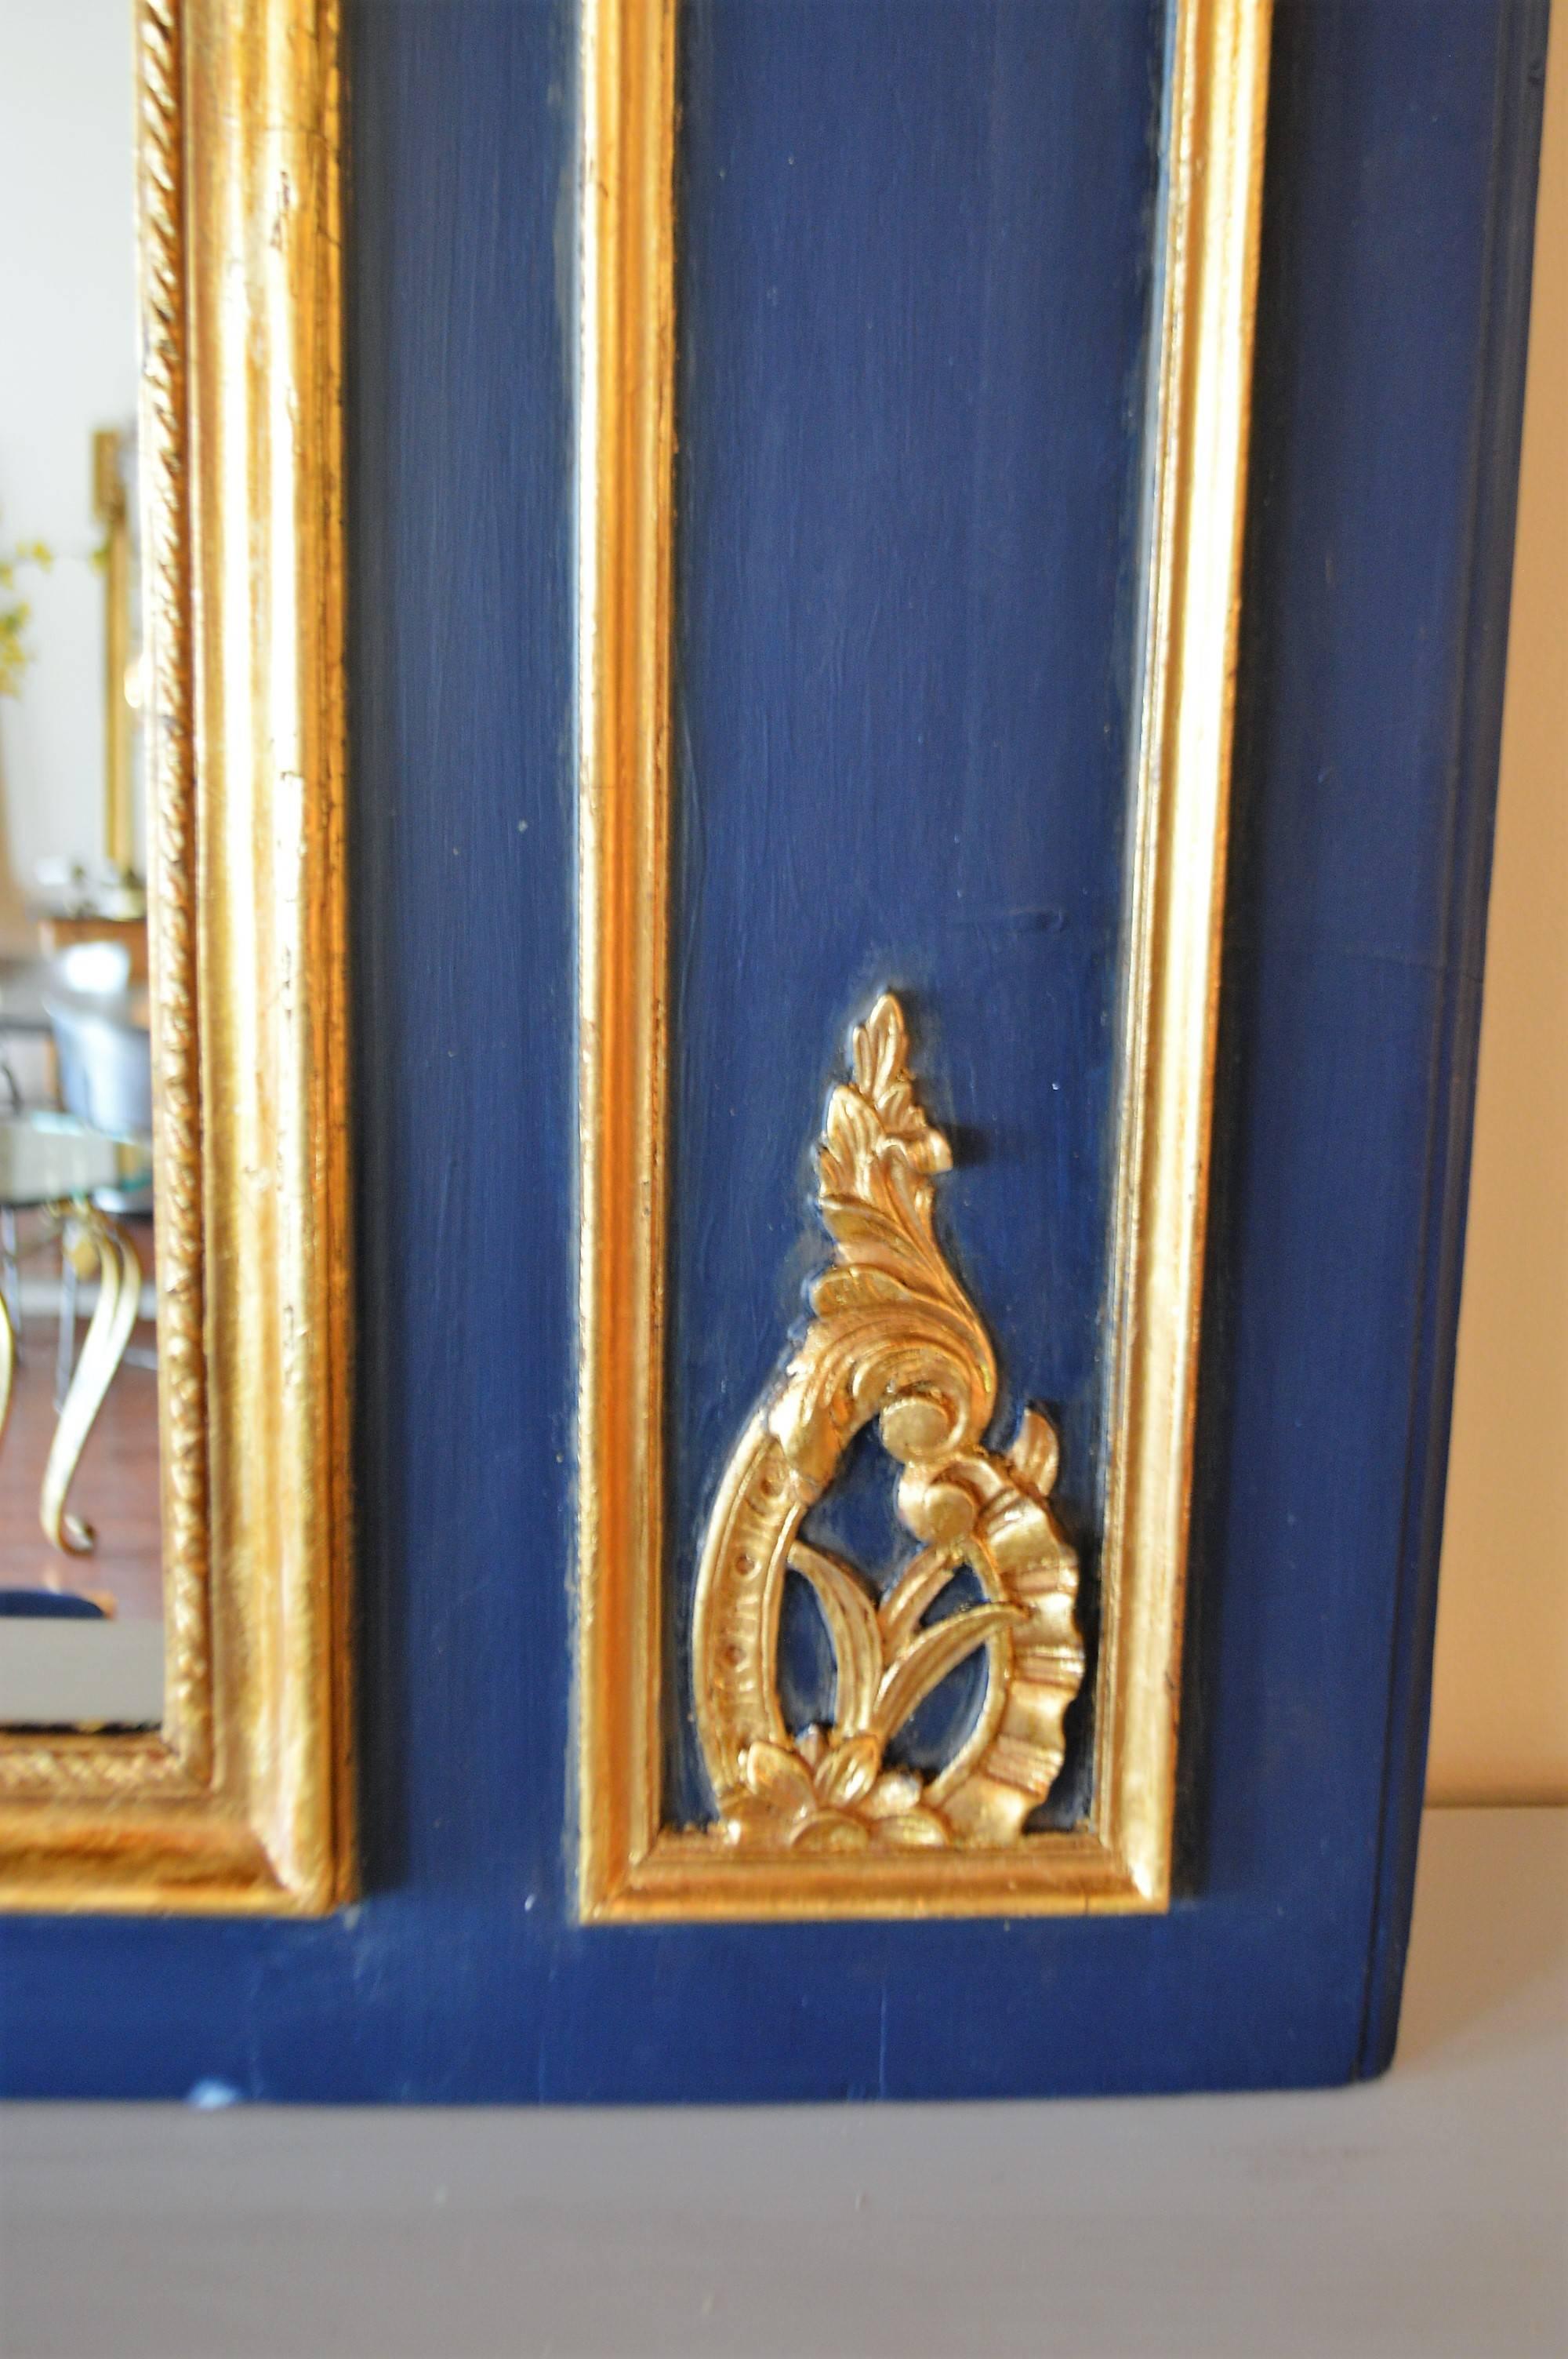 A stunning dark blue trumeau mirror with hand-carved gilded details accents.
Both mirrors are new.